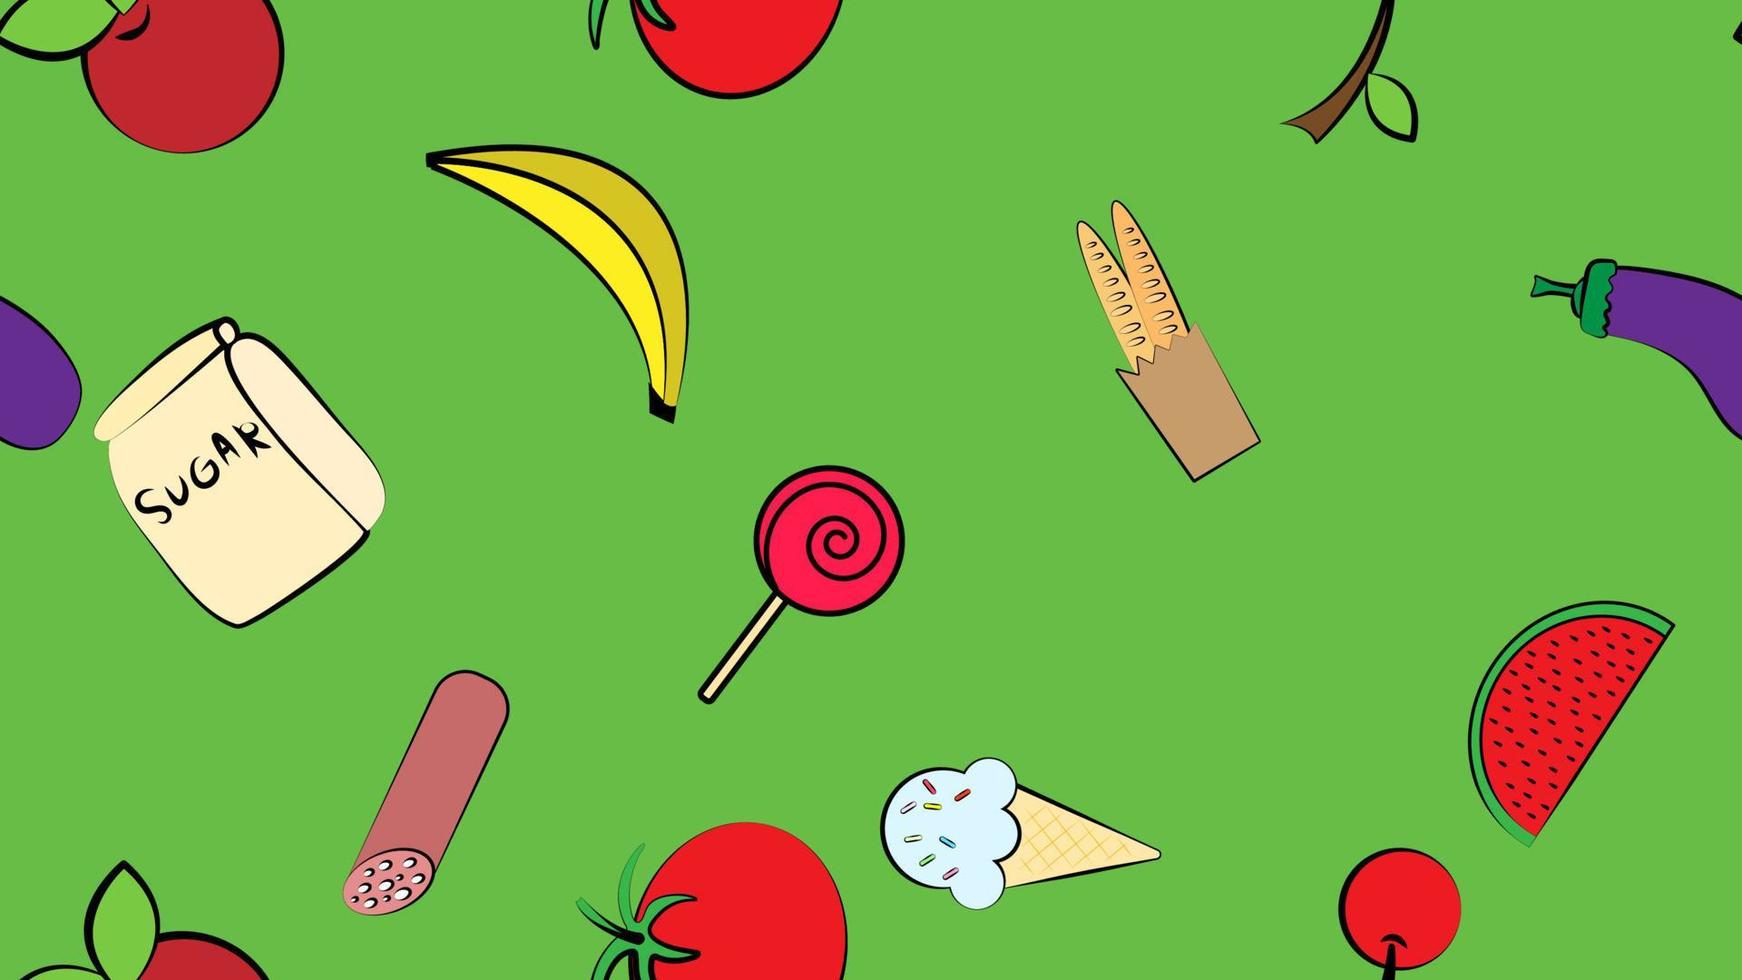 Endless green seamless pattern of delicious food and snack items icons set for restaurant bar cafe shrimp, fish, eggplant, tomato, sausage, banana, ice cream, watermelon, kiwi. The background vector